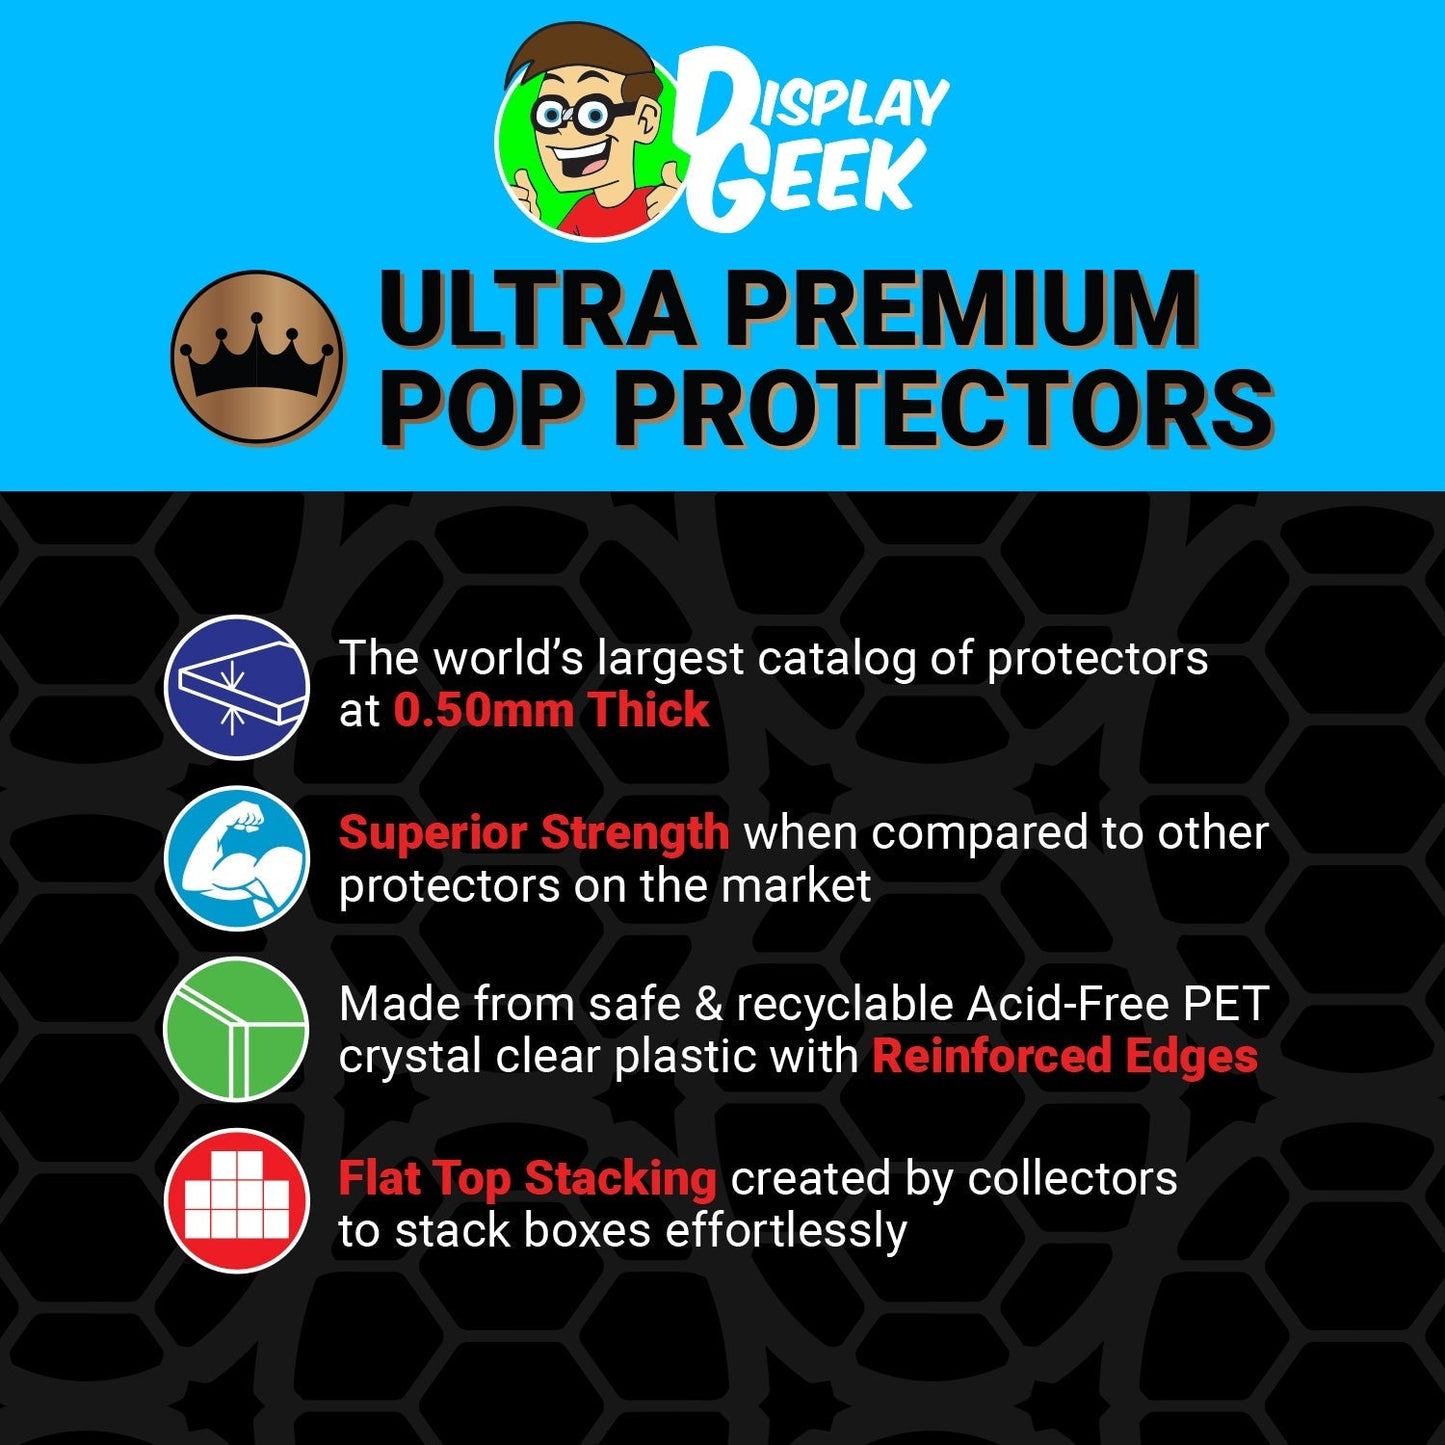 Pop Protector for Batman Gamer Funko Pop Pez - PPG Pop Protector Guide Search Created by Display Geek